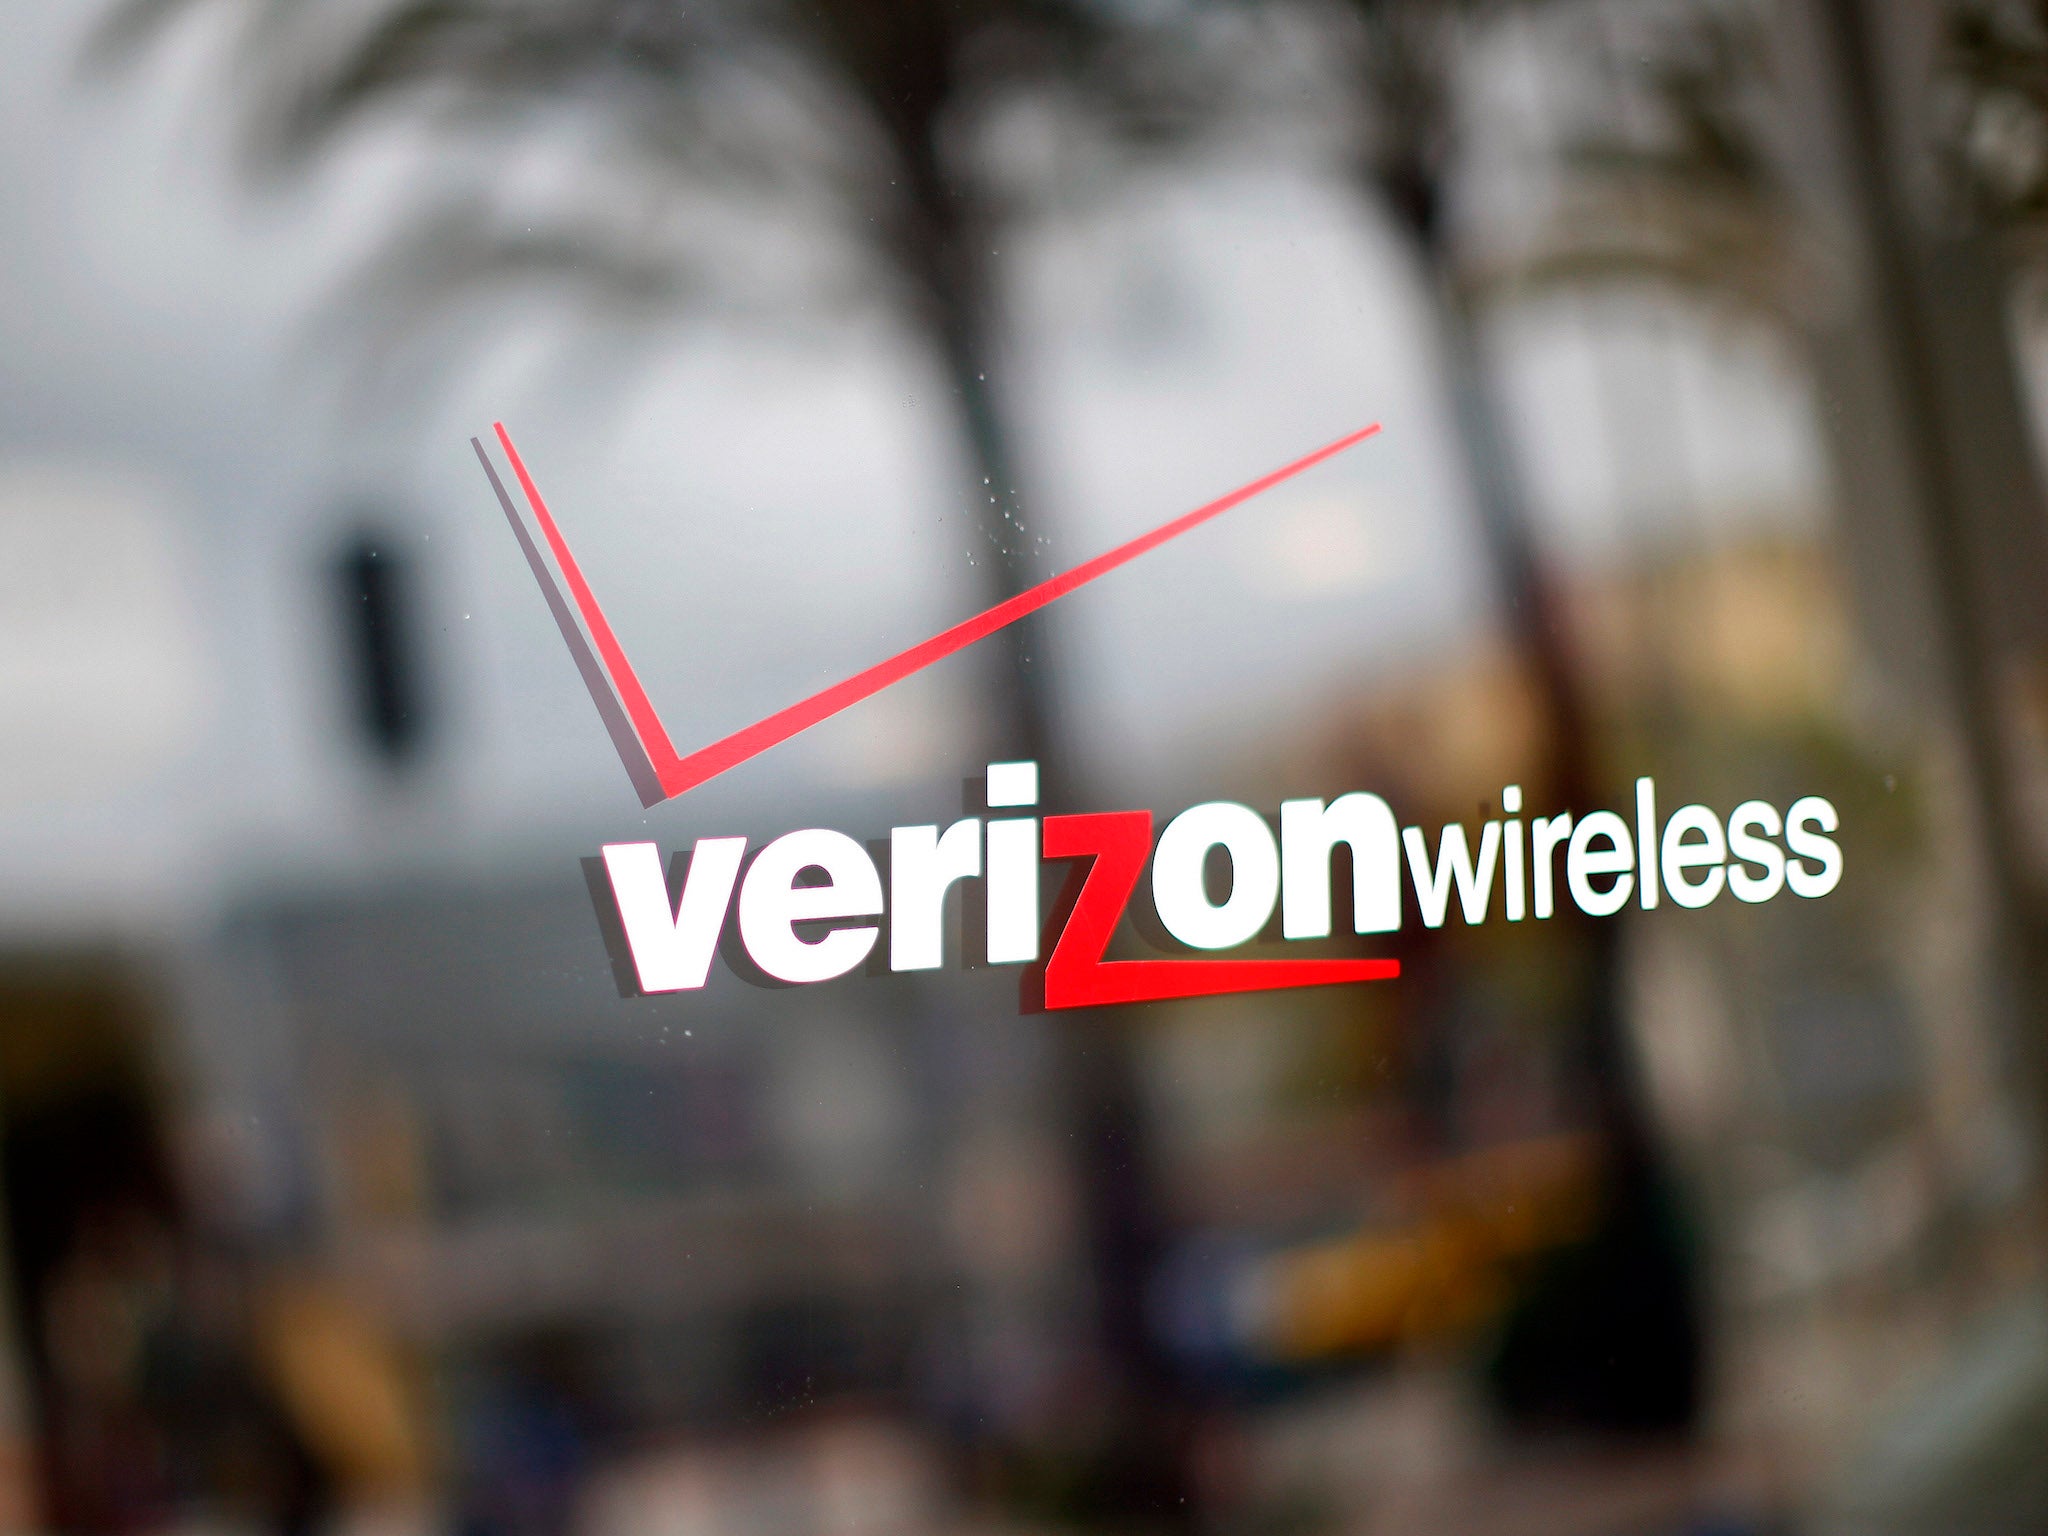 Verizon had announced plans to launch a video service focussed on mobile devices this summer